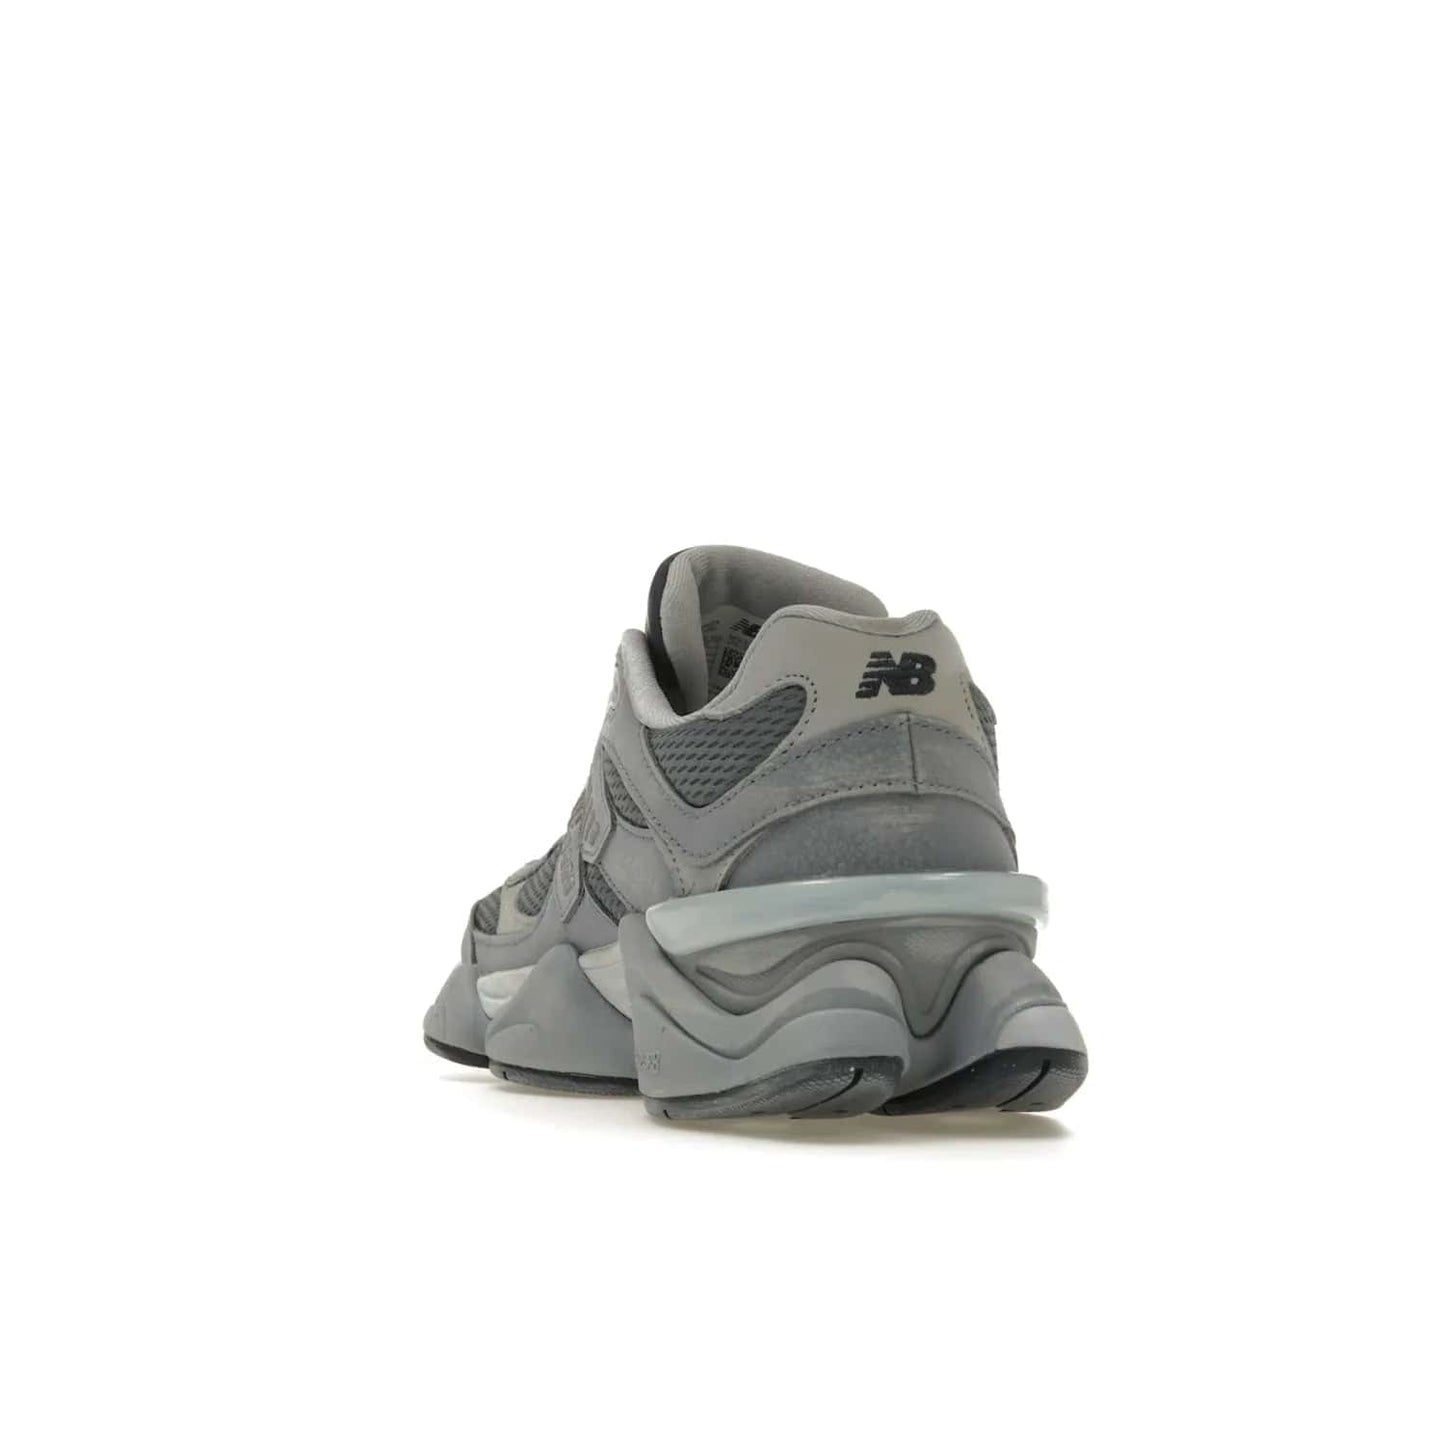 New Balance 9060 Grey Day (2023) - Image 26 - Only at www.BallersClubKickz.com - #
Sporty-meets-stylish in the New Balance 9060 Grey Day sneaker. Designed with Arctic Grey, Steel, and Silver Metallic, it offers an edgy but wearable look along with classic NB comfort and quality.